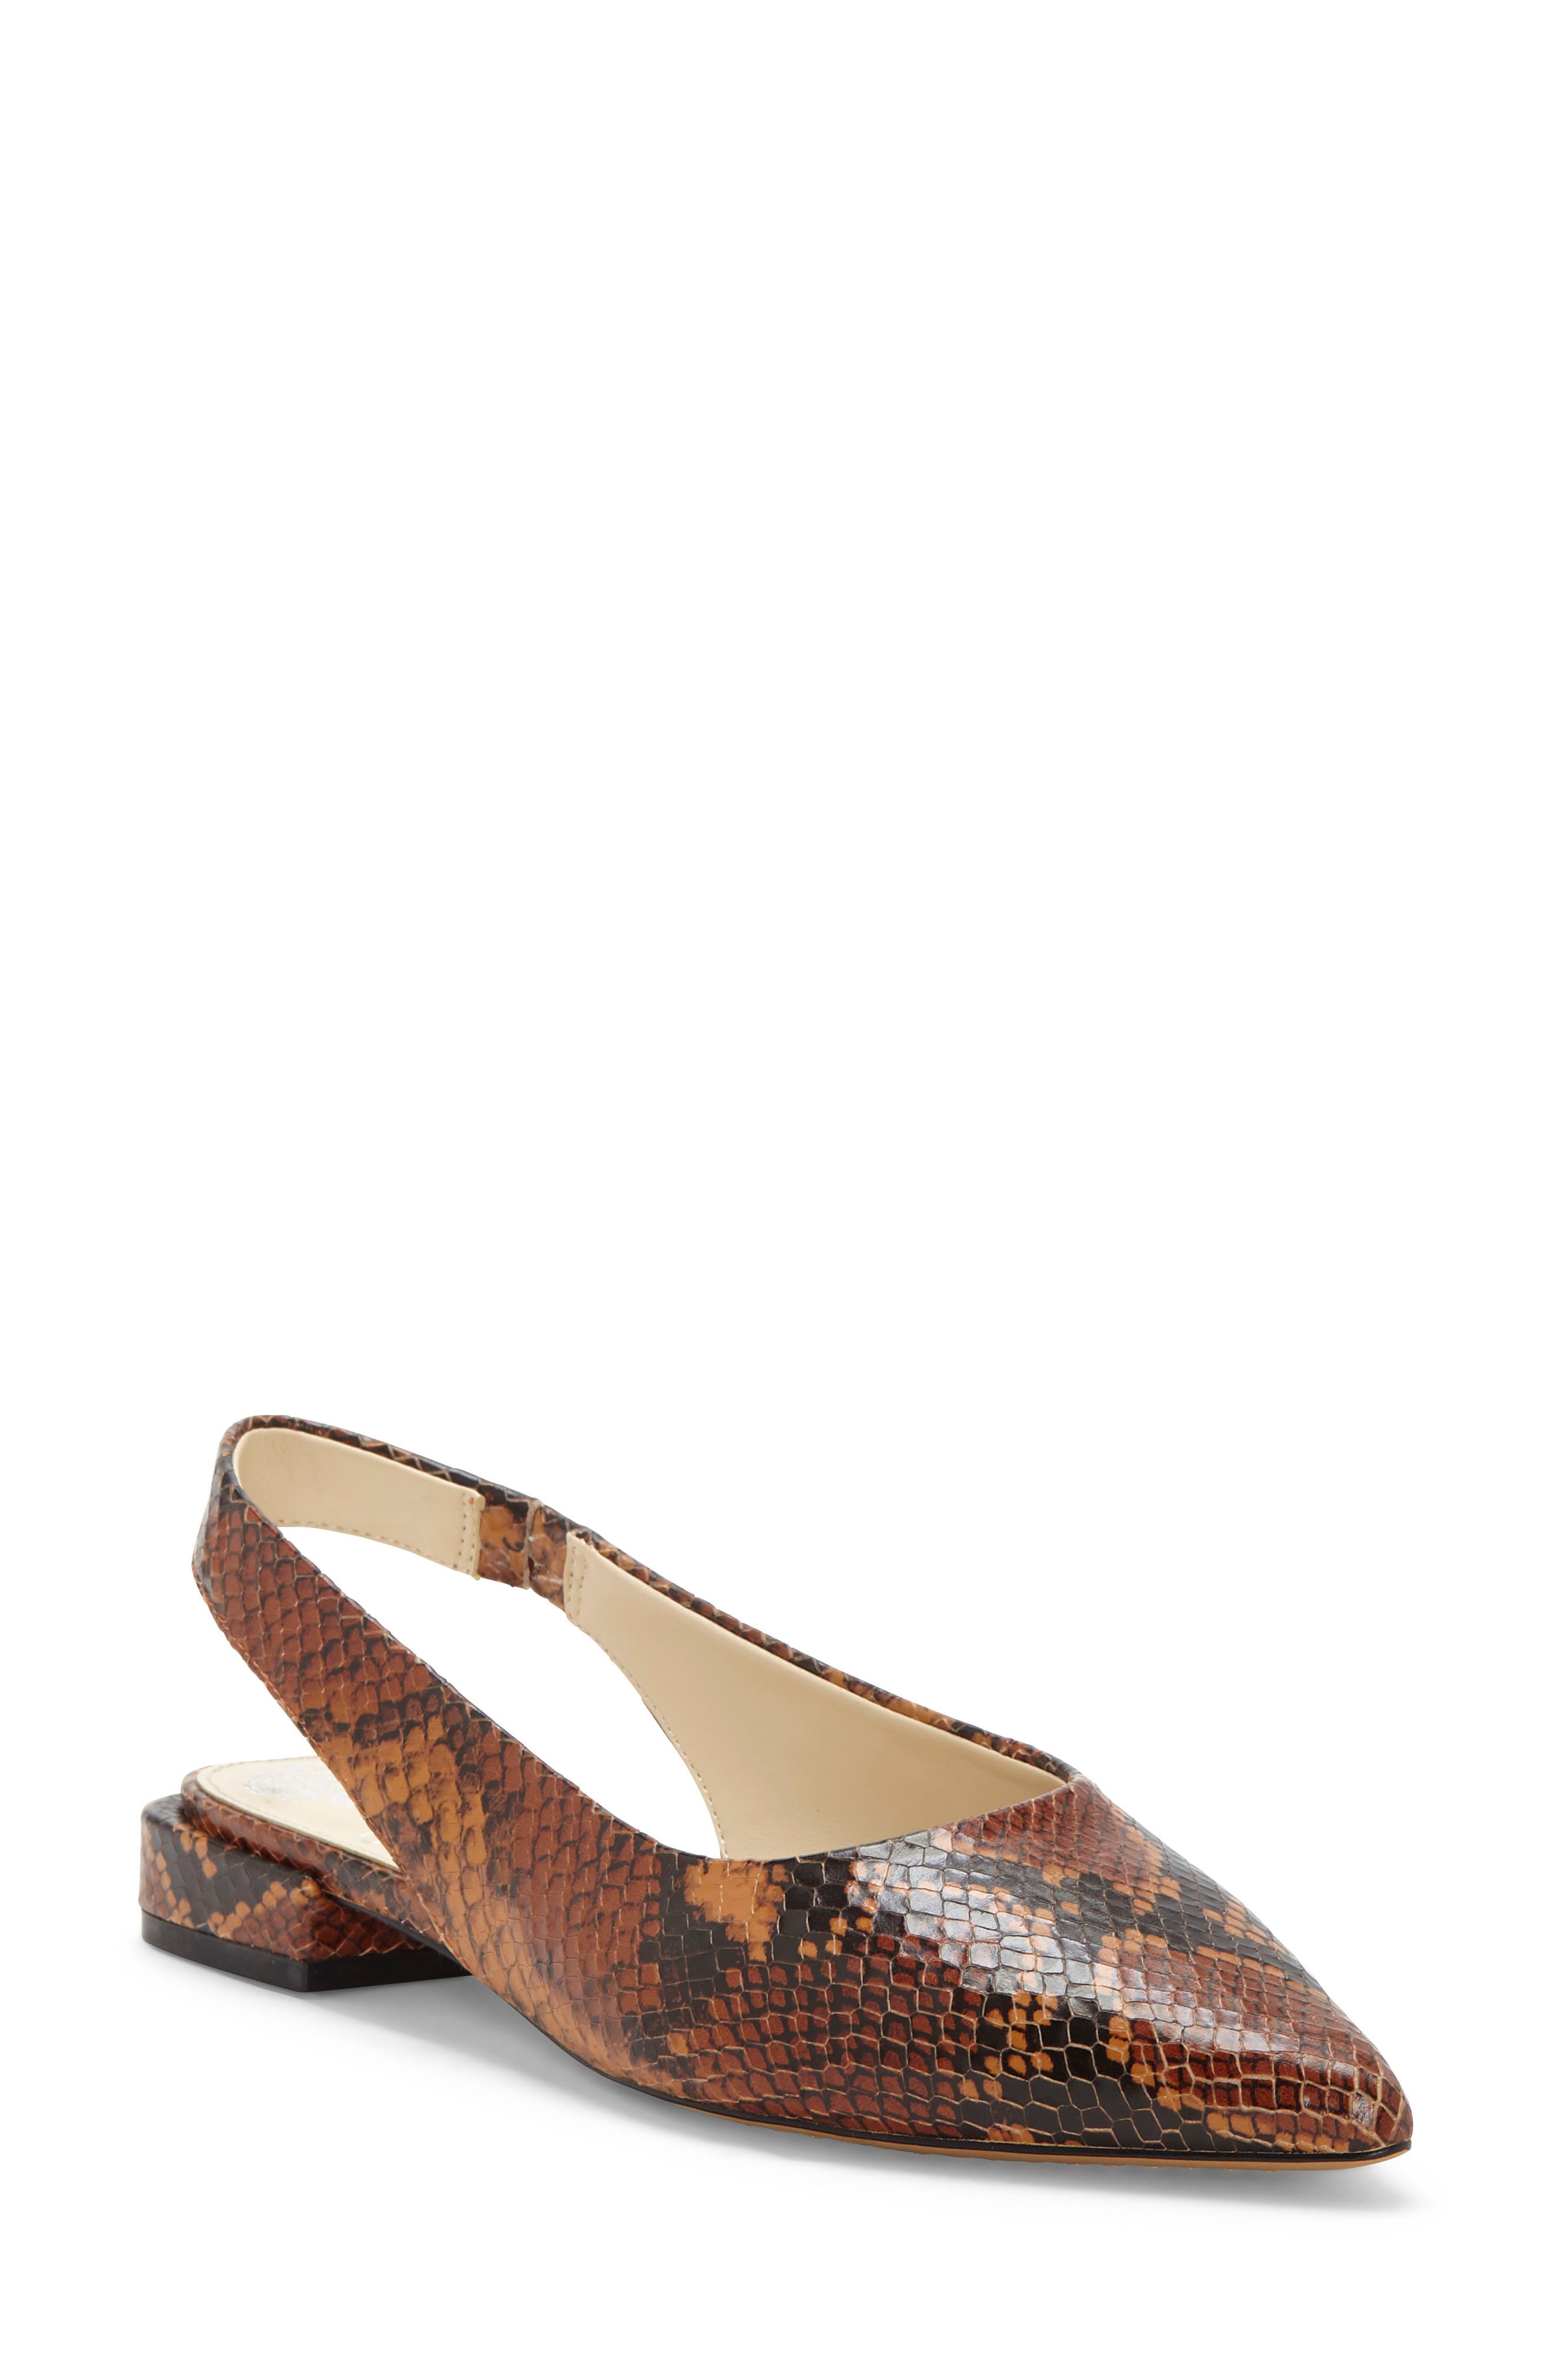 UPC 192151618750 product image for Women's Vince Camuto Chachen Slingback Flat, Size 5 M - Brown | upcitemdb.com